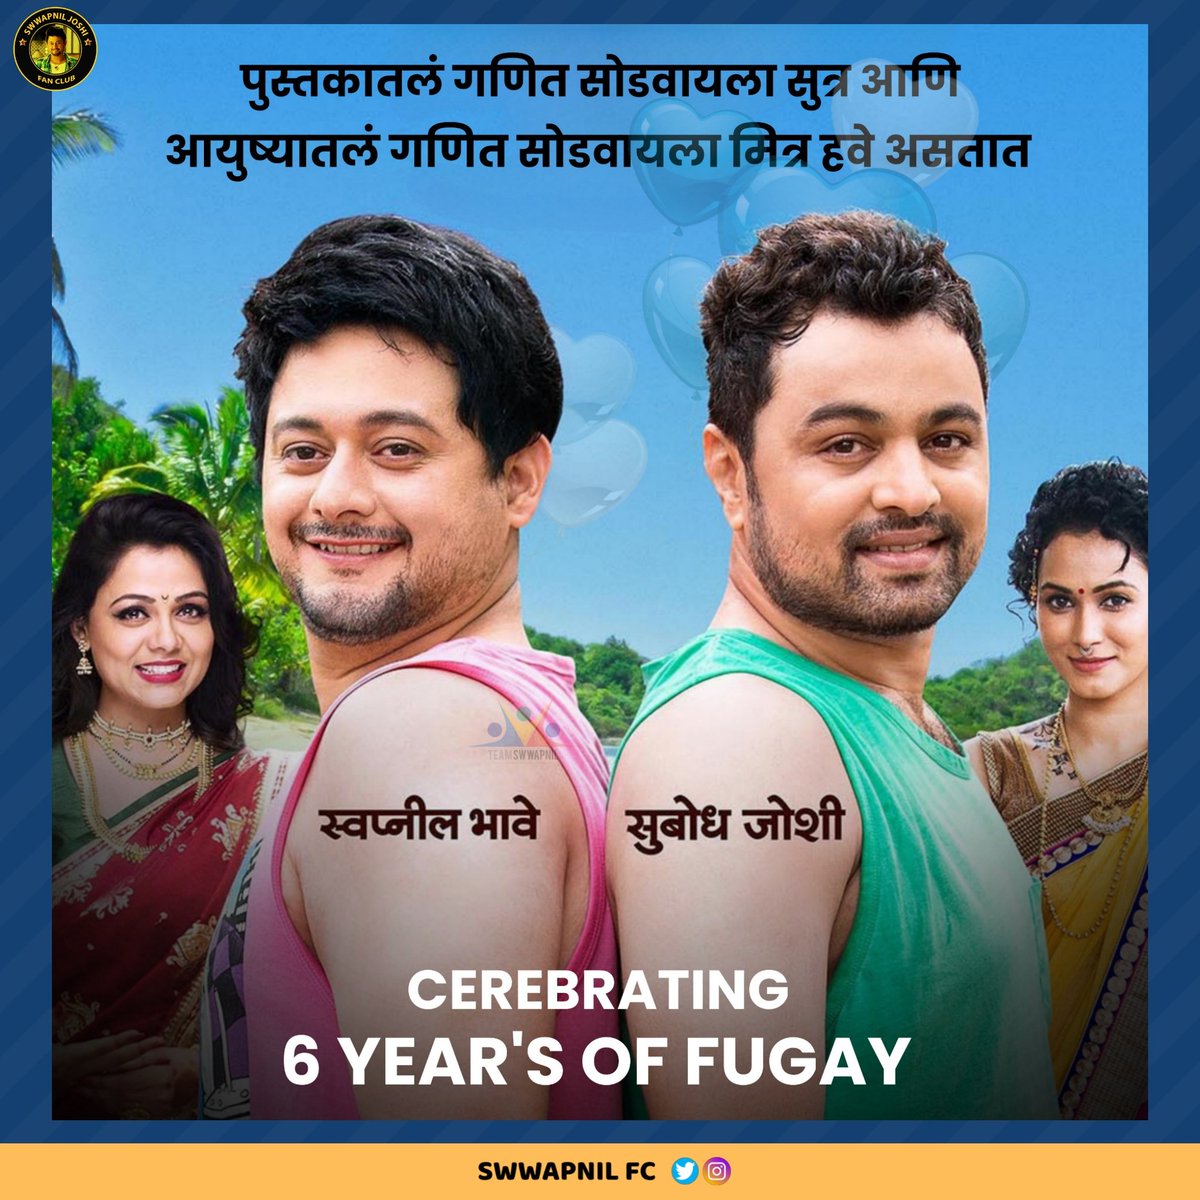 Today we are celebrating 6 Years Of Fugay !! ❤️

Fugay is the story about Two friends grow up together and They go to Goa to celebrate a bachelor party but end up getting in trouble.

You can watch fugay on @PrimeVideoIN.

#6YearsOfFugay #swwapniljoshi #subhodbhave #fugay